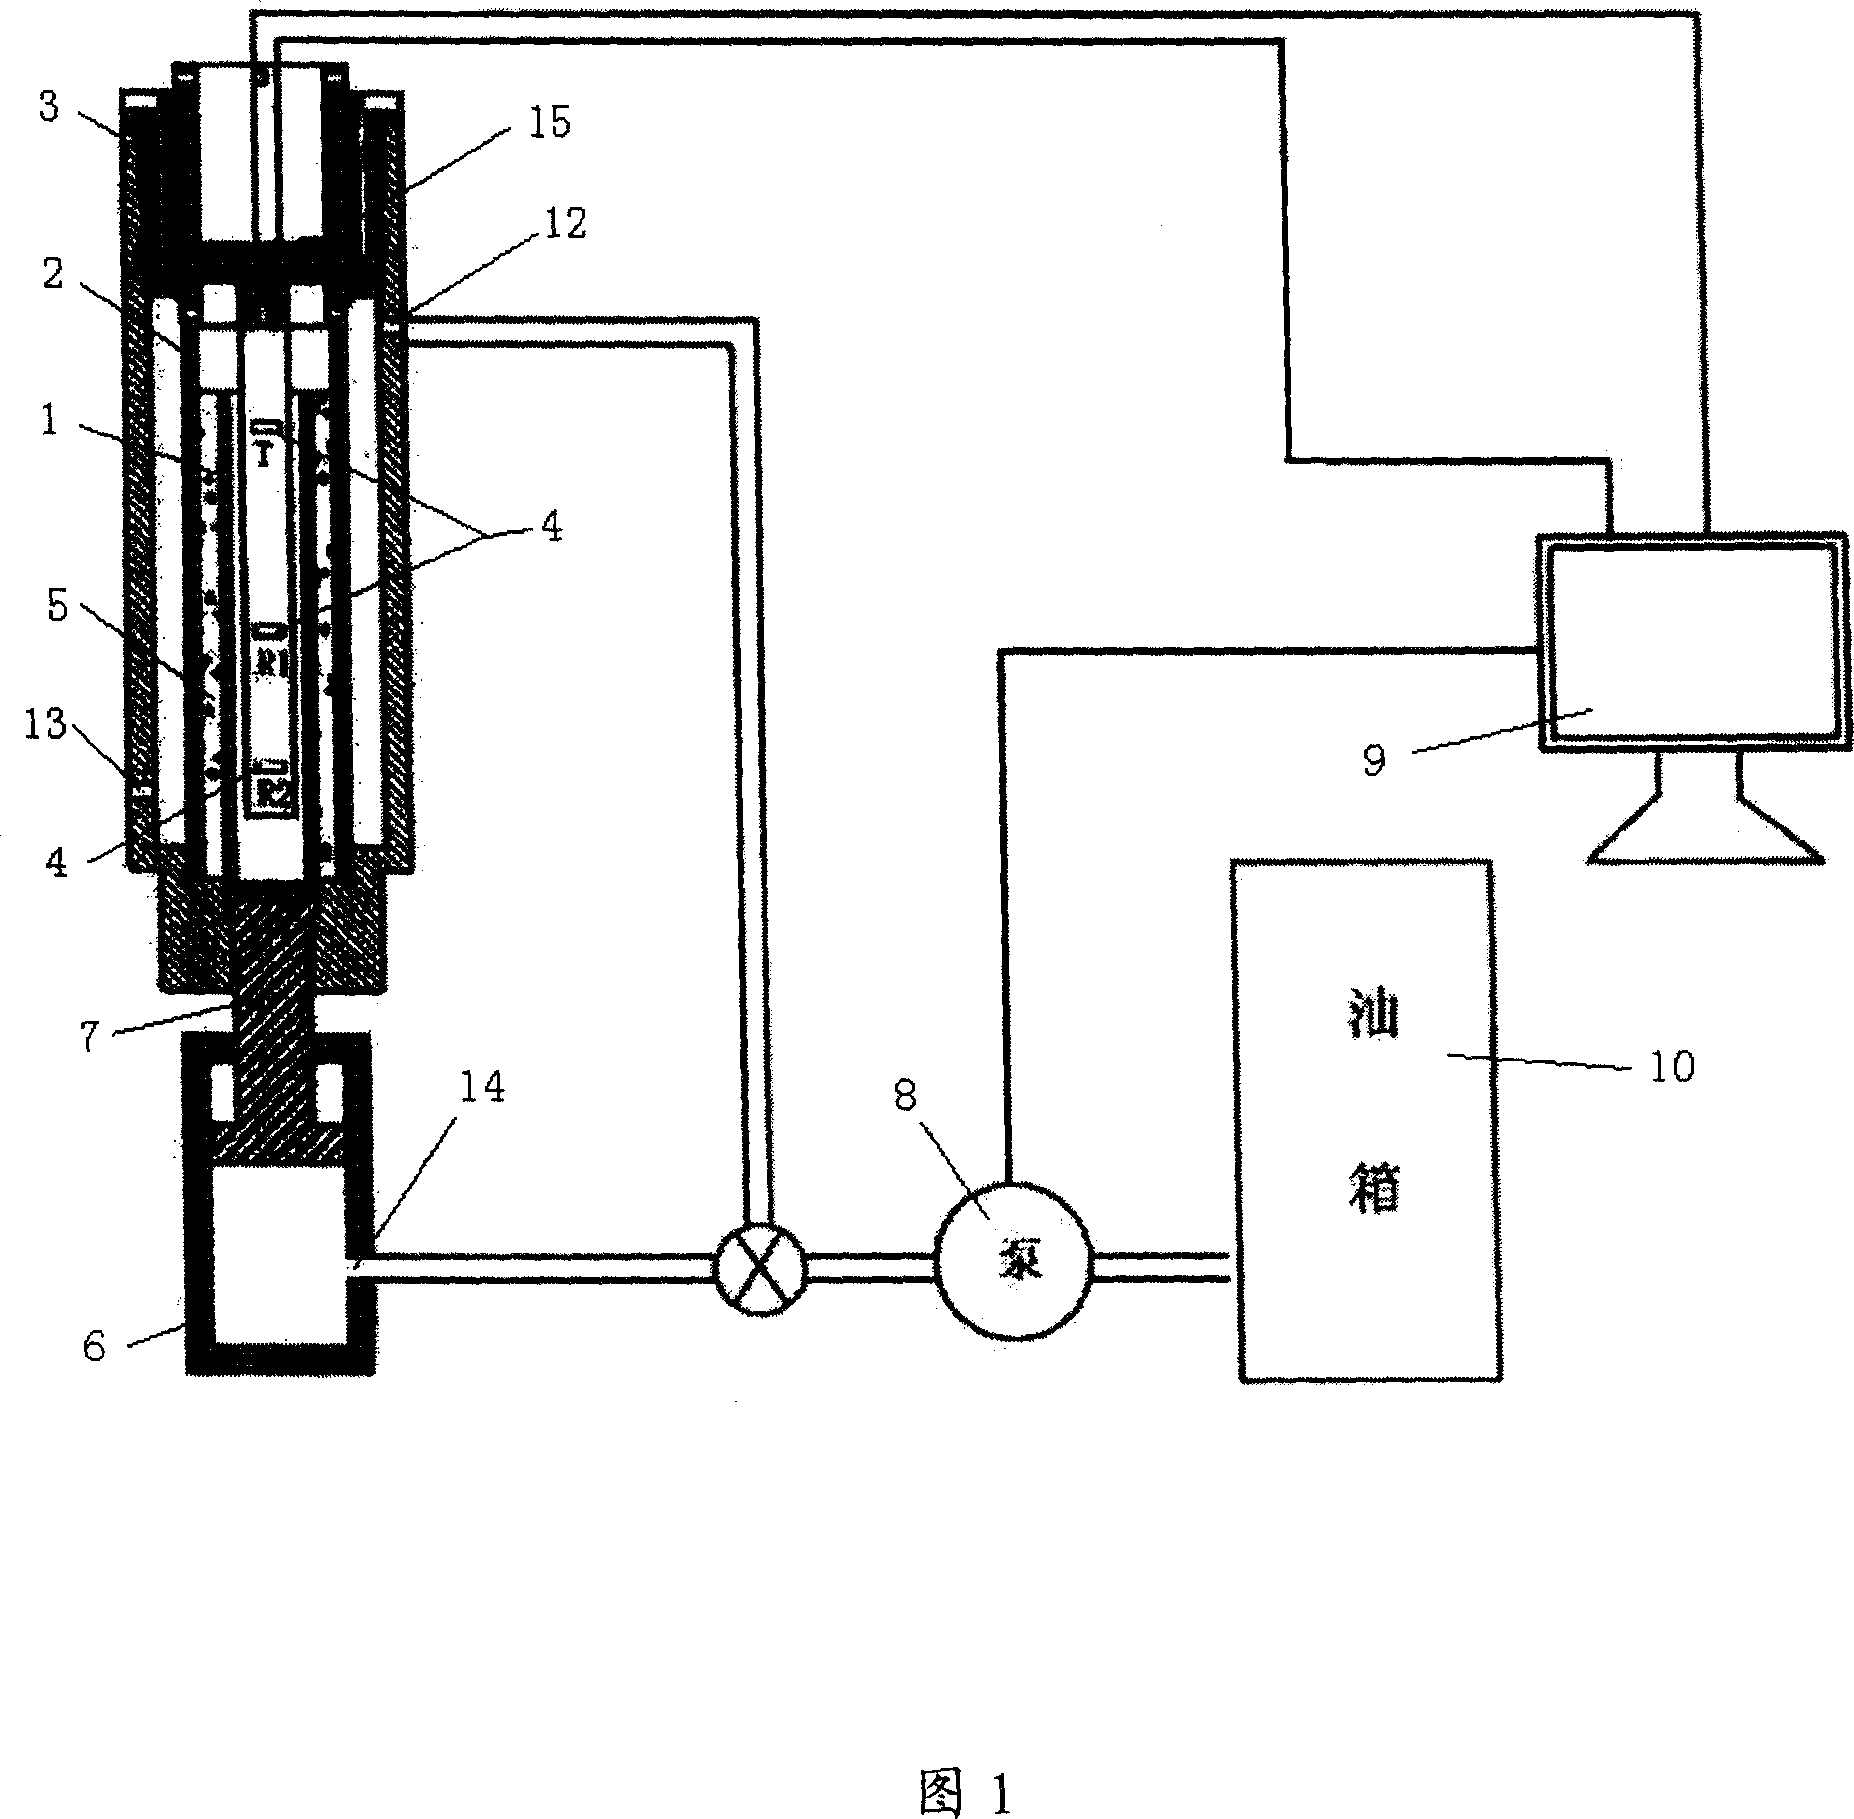 Cement interface shearing in annulus supersonic ultrasonic testing method